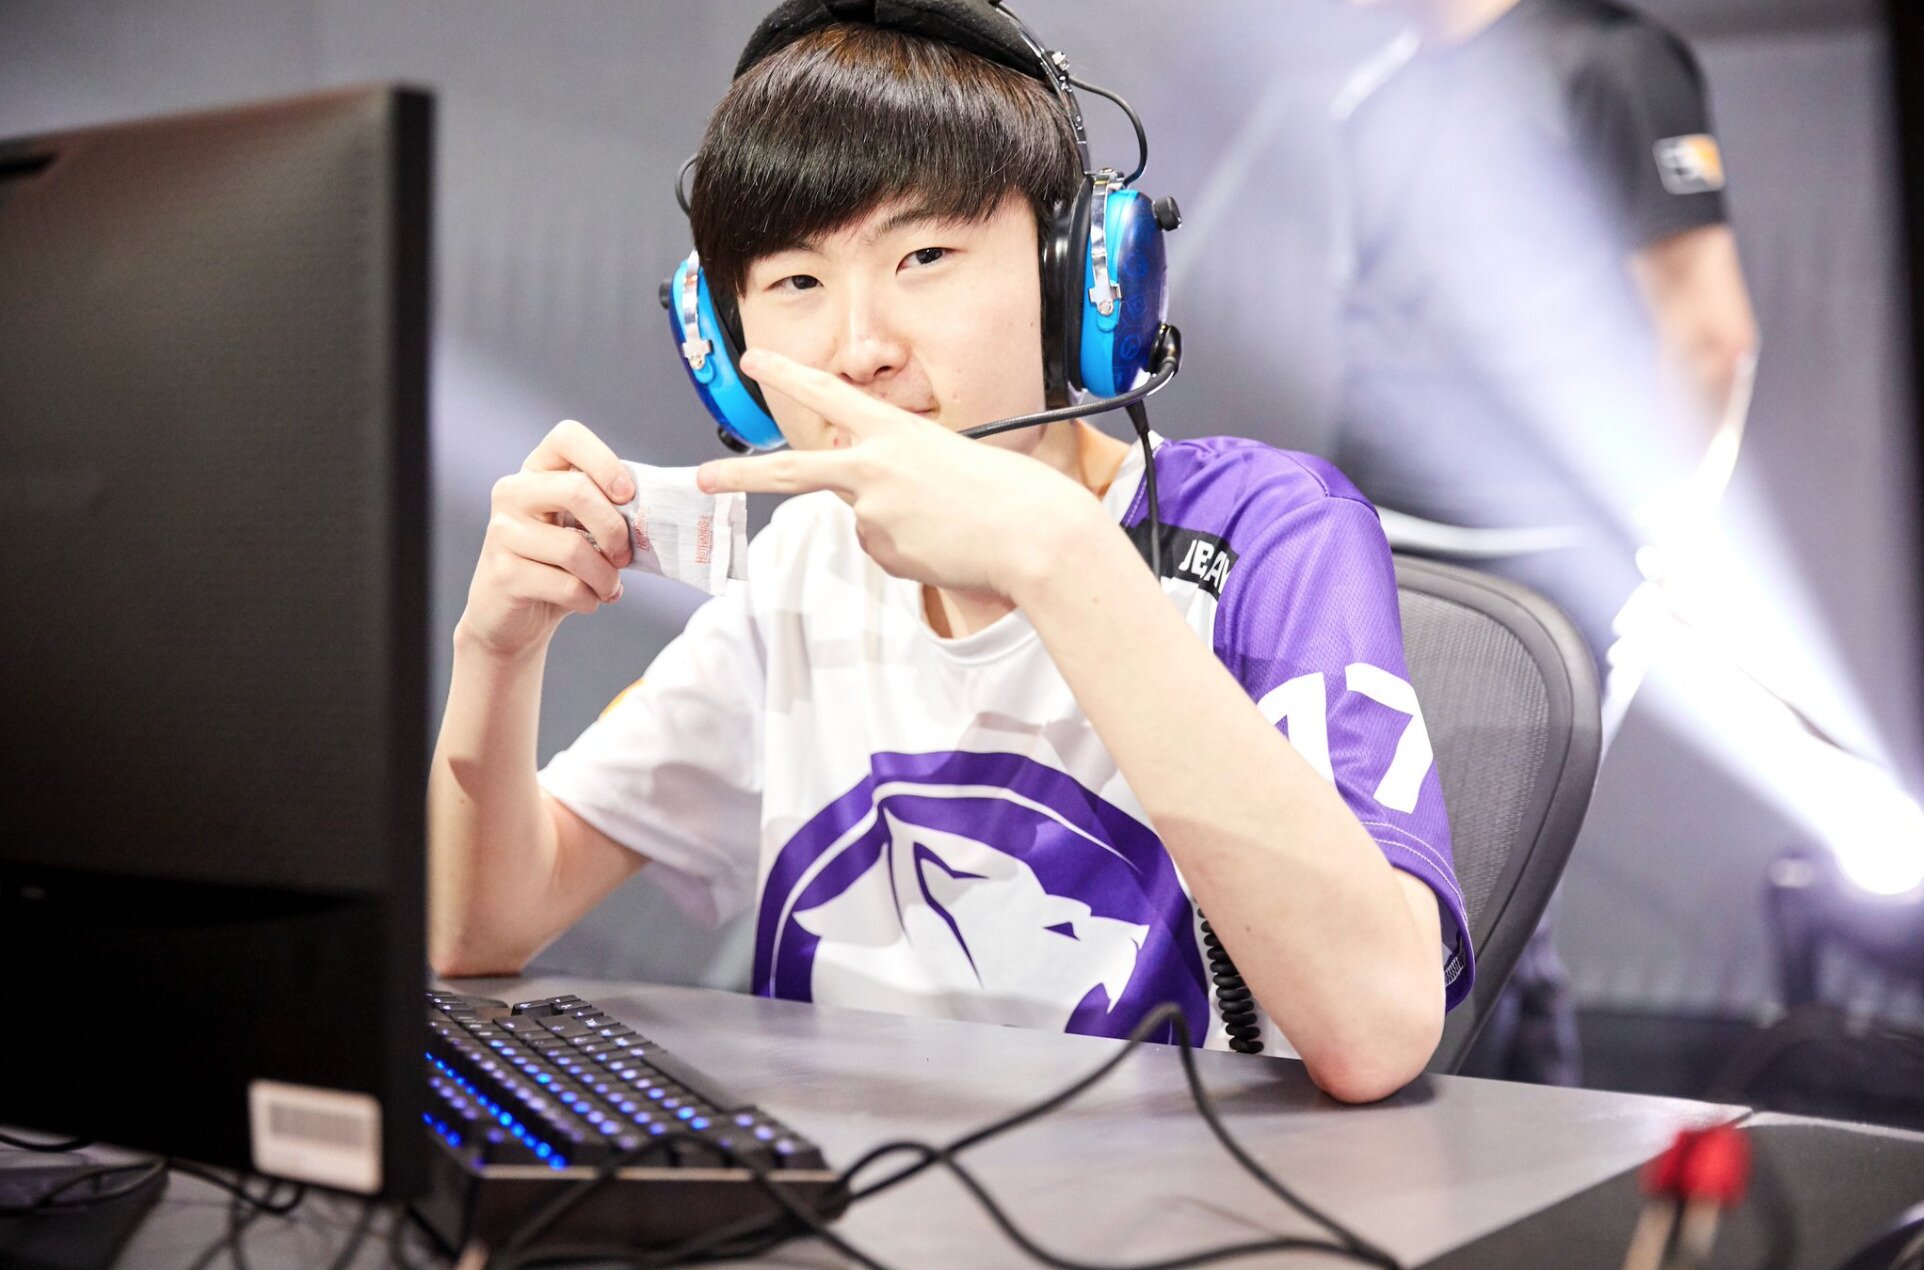 Decay has brought a spark to the Los Angeles Gladiators lineup but he might not be enough to hide their past issues. (Image courtesy of OWL)